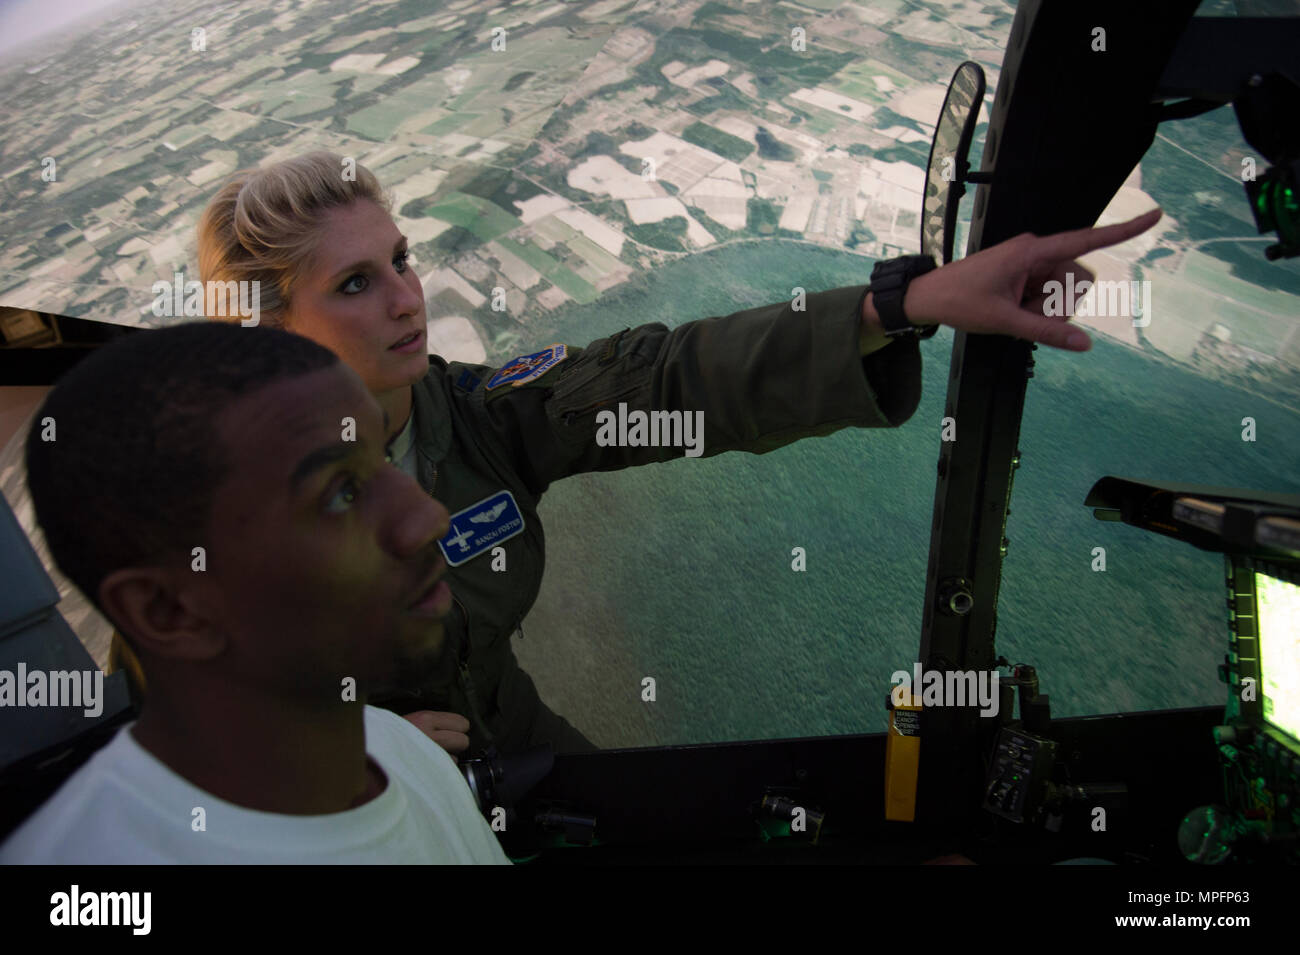 Capt. Kayla Foster, 74th Fighter Squadron A-10C Thunderbolt II pilot, gives instruction to Malcolm Mitchell, New England Patriots’ wide receiver and Super Bowl LI Champion, on operating the A-10 simulator during a visit March 7, 2017, at Moody Air Force Base, Ga. Mitchell, a Valdosta native, got a glimpse of a typical day in the life of Moody Airmen. Mitchell also spent time with Airmen and signed autographs for local Patriots’ fans during his visit. (U.S. Air Force photo by Andrea Jenkins) Stock Photo